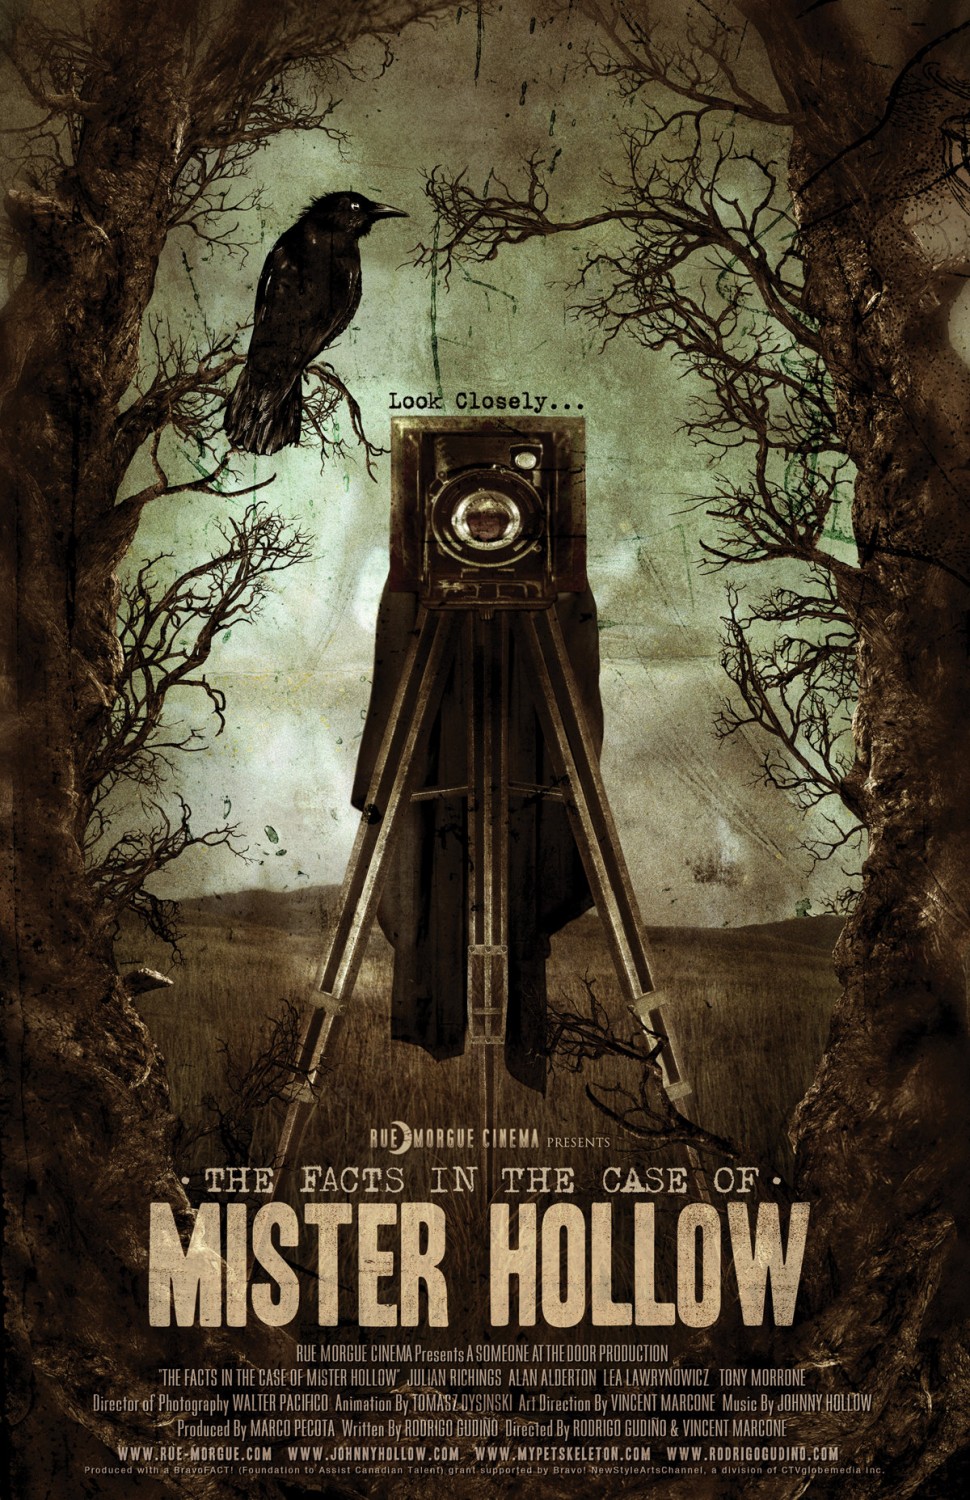 Extra Large Movie Poster Image for The Facts in the Case of Mister Hollow